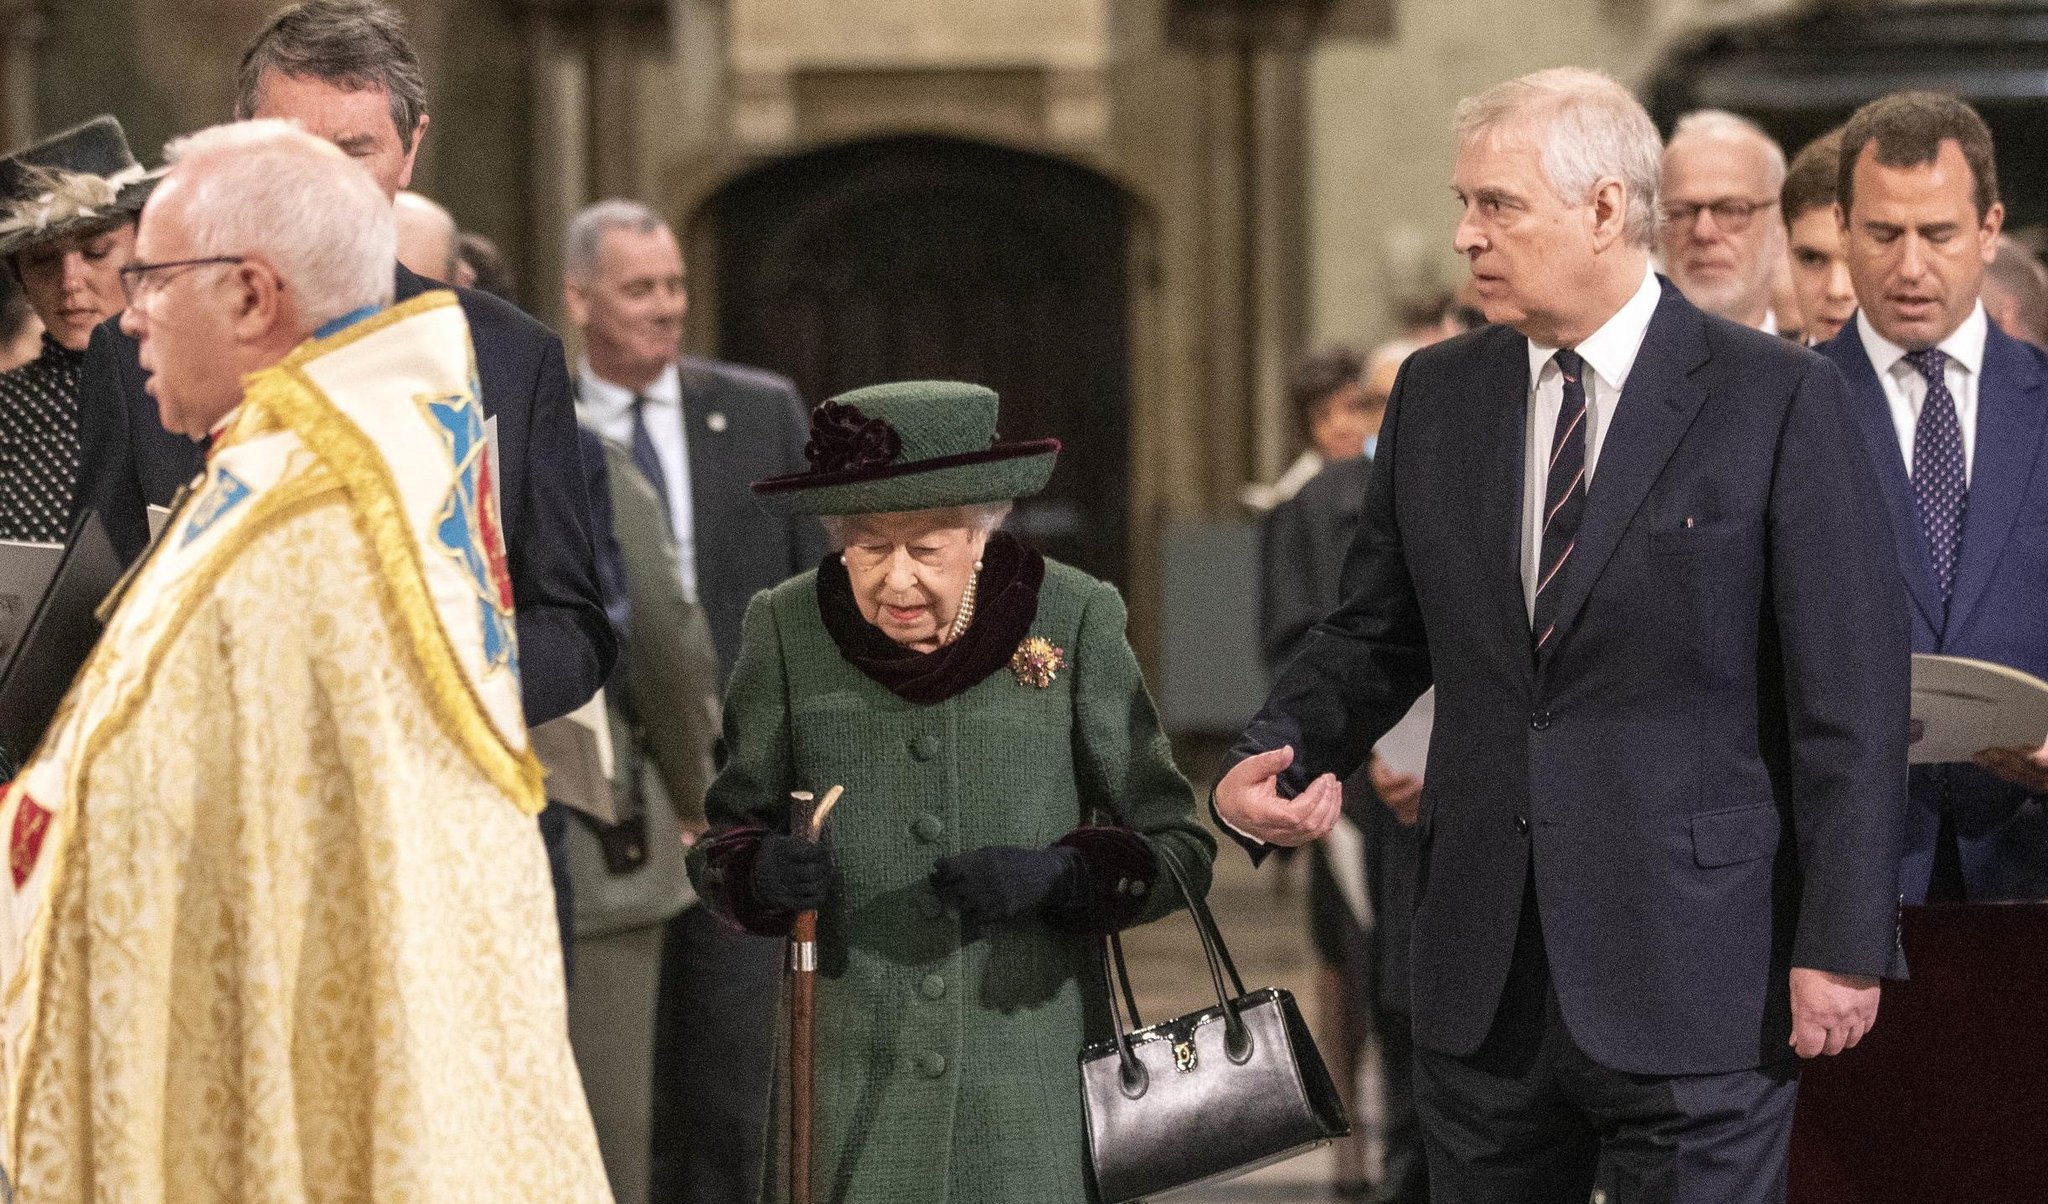 Queen and senior royals, including Duke of York, attend Philip memorial service